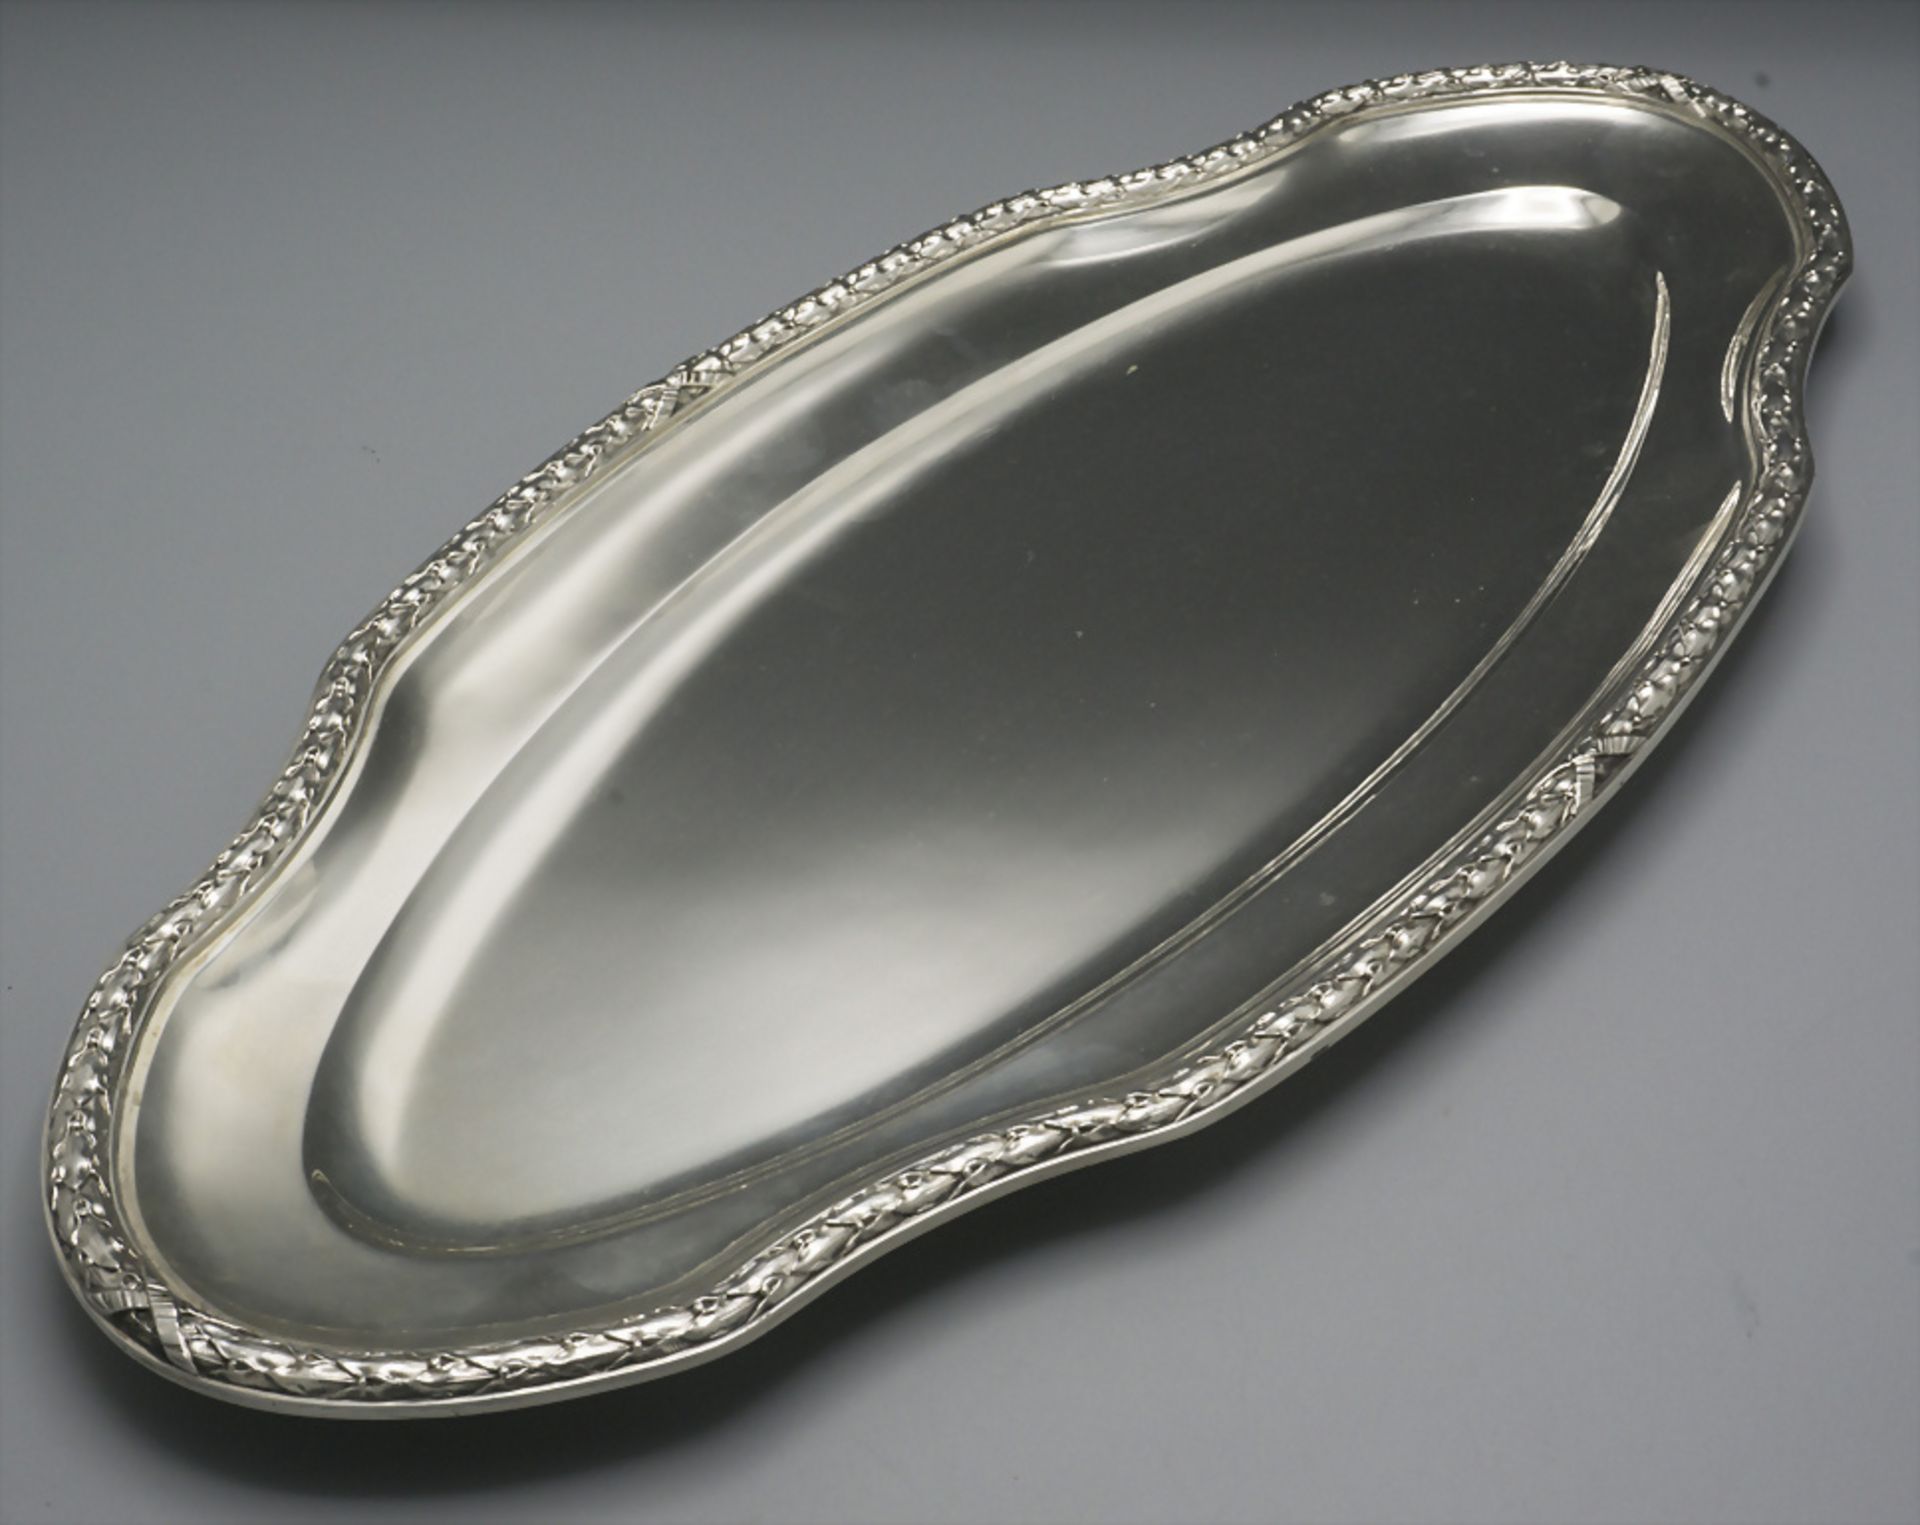 Ovale Platte / An oval silver plate, um 1900 - Image 2 of 6